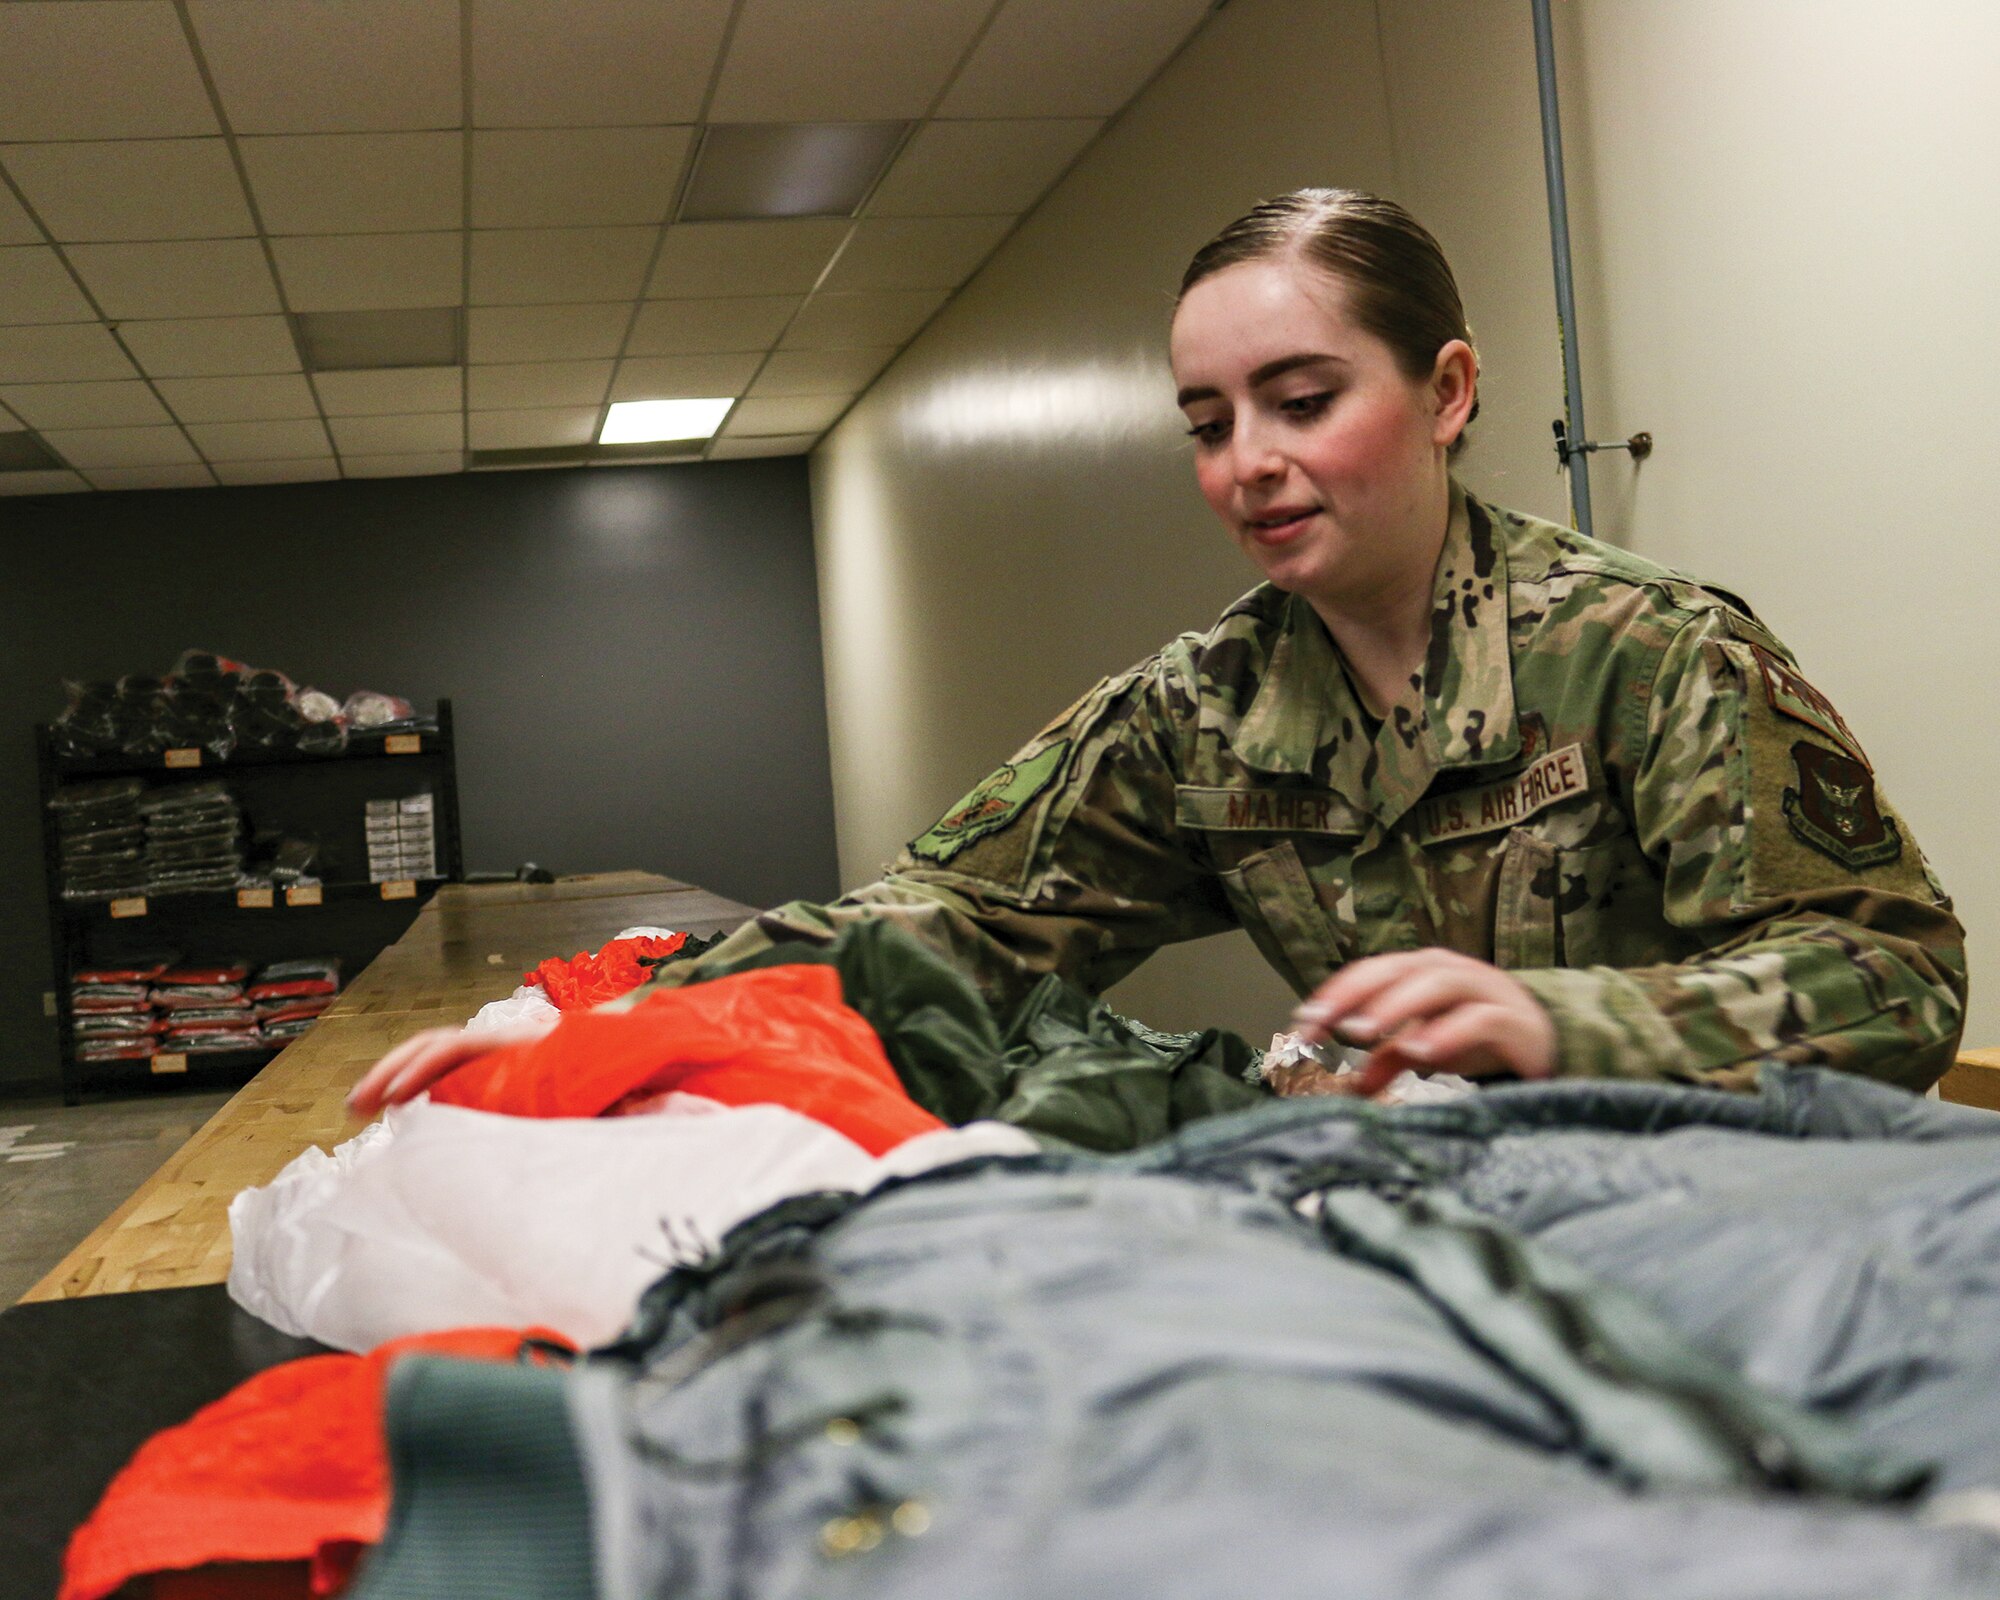 Senior Airman Sarah Maher, 445th Operations Support Squadron aircrew flight equipment technician, inspects an unserviceable parachute before it is replaced, March 14, 2022. Unserviceable parachutes are turned in to base supply and exchanged for new ones.